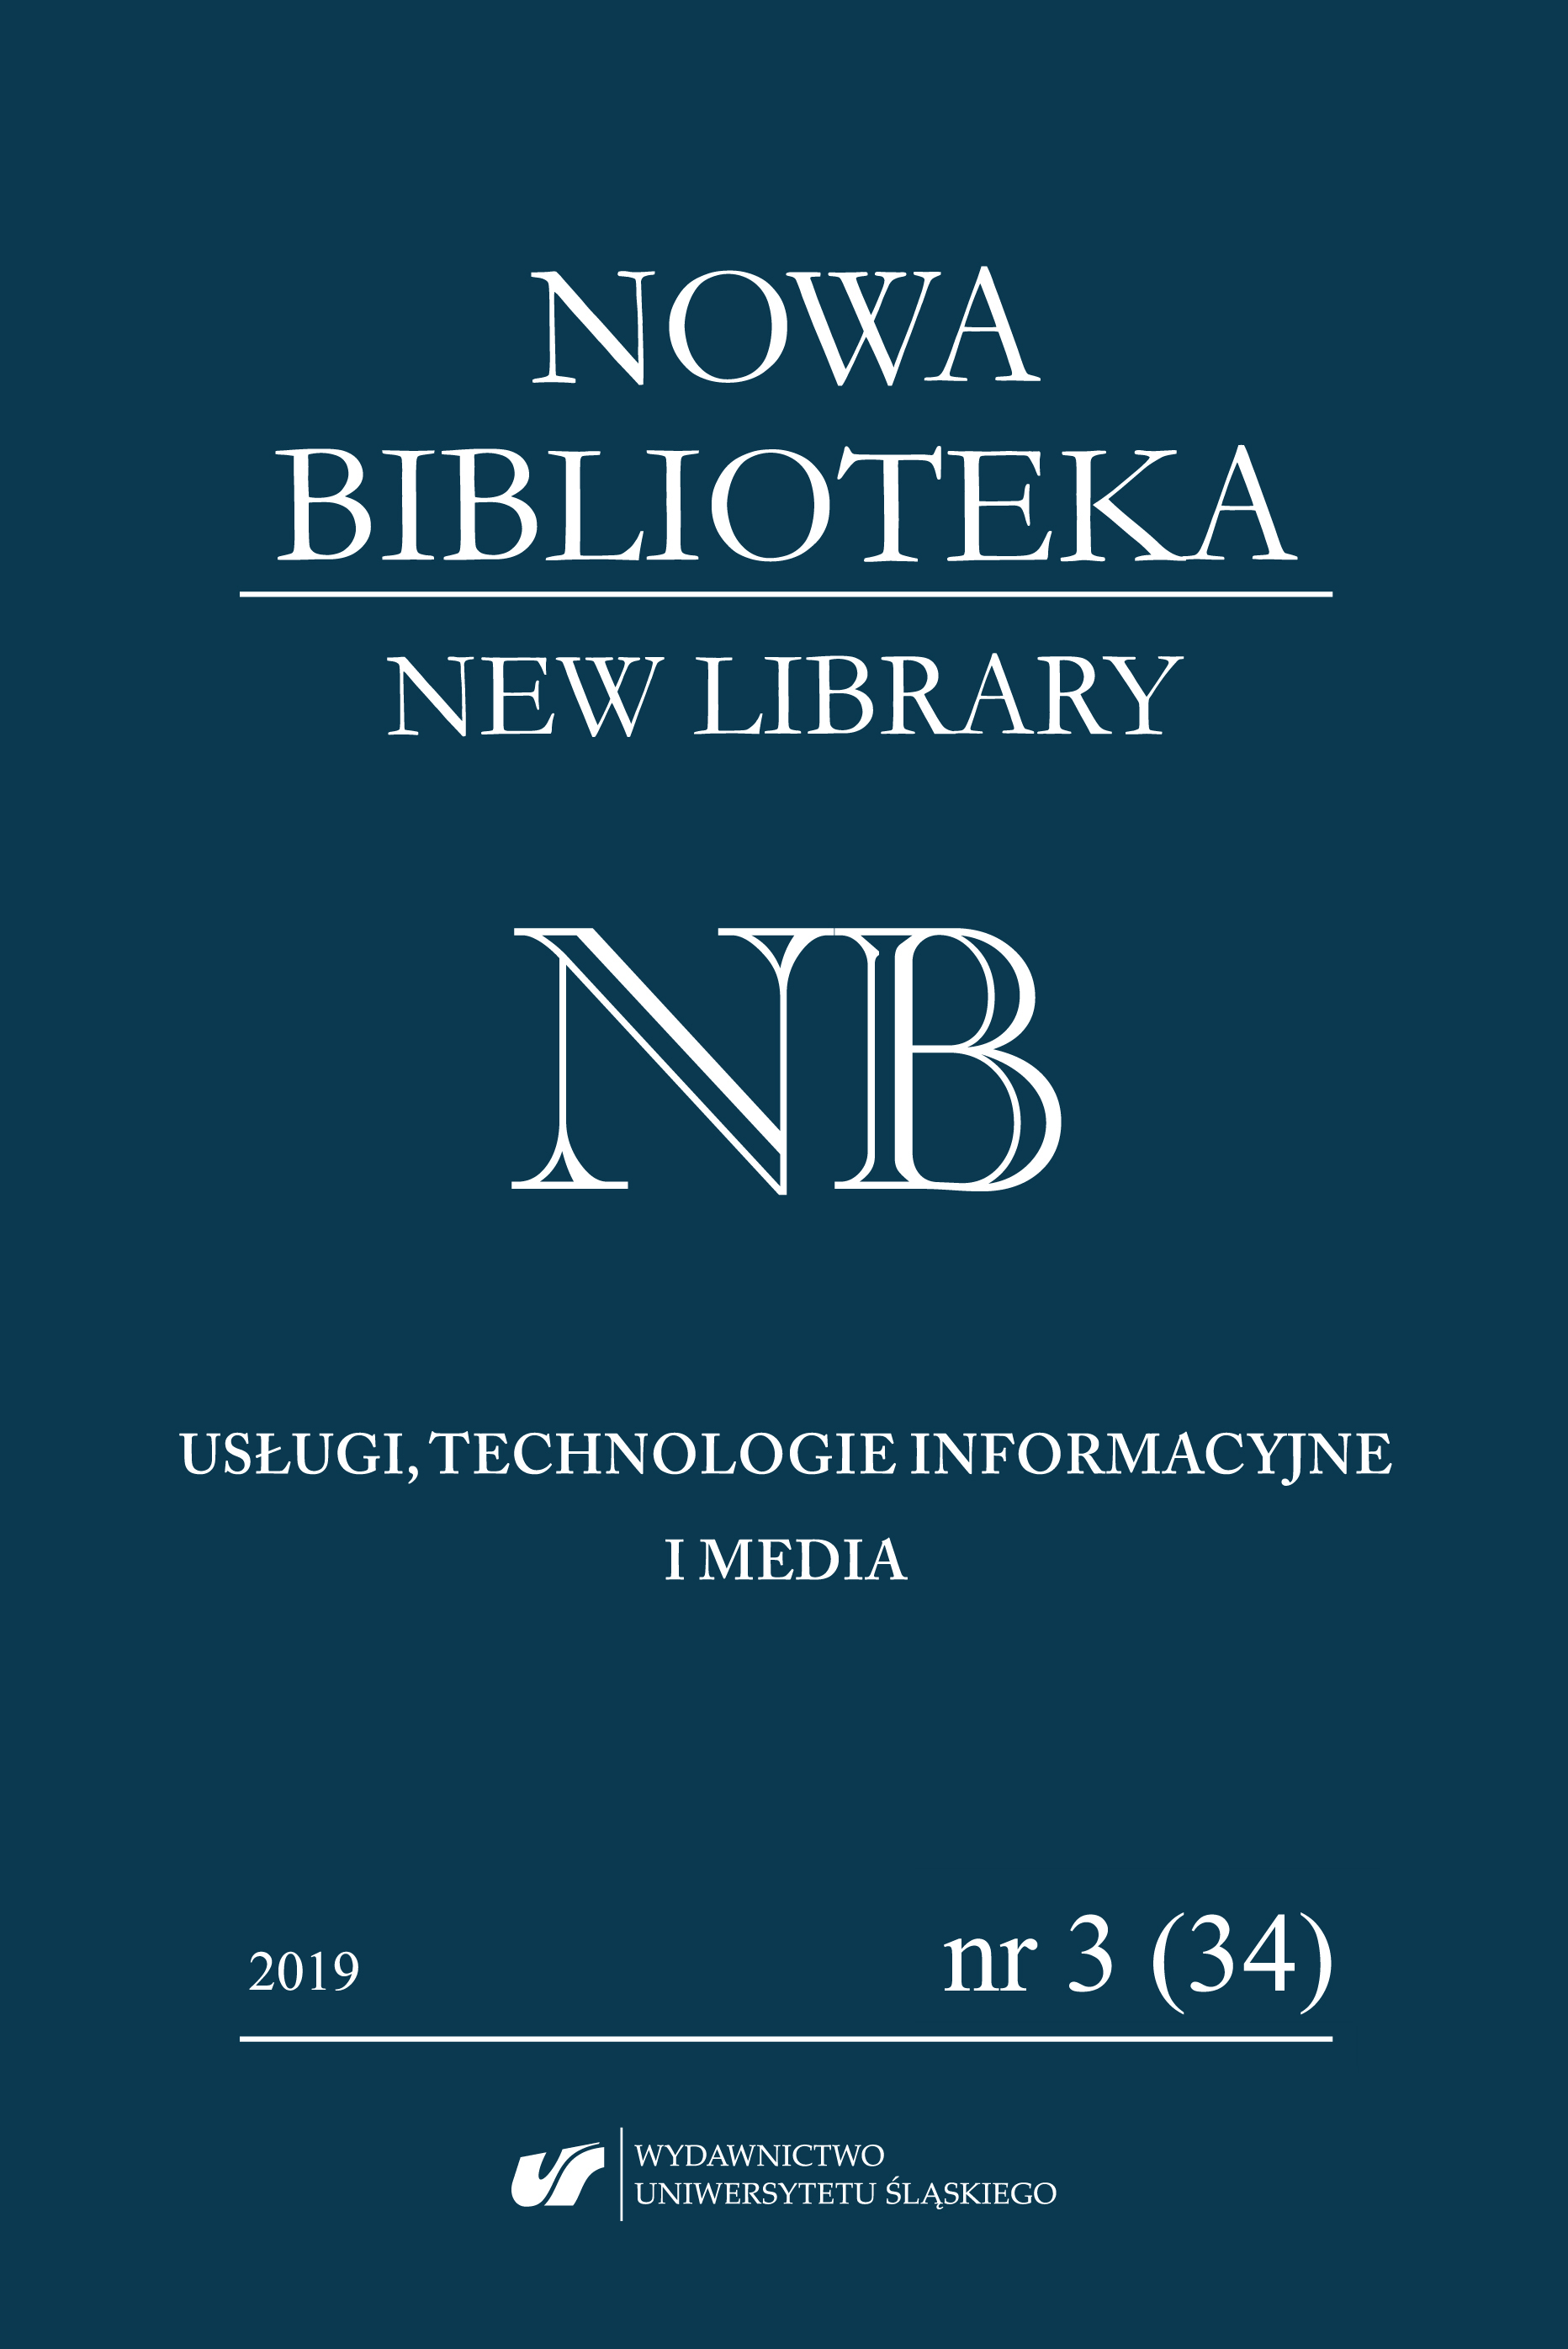 Making use of multimedia, technologies, and board games: The case of the City Public Library in Gliwice Cover Image